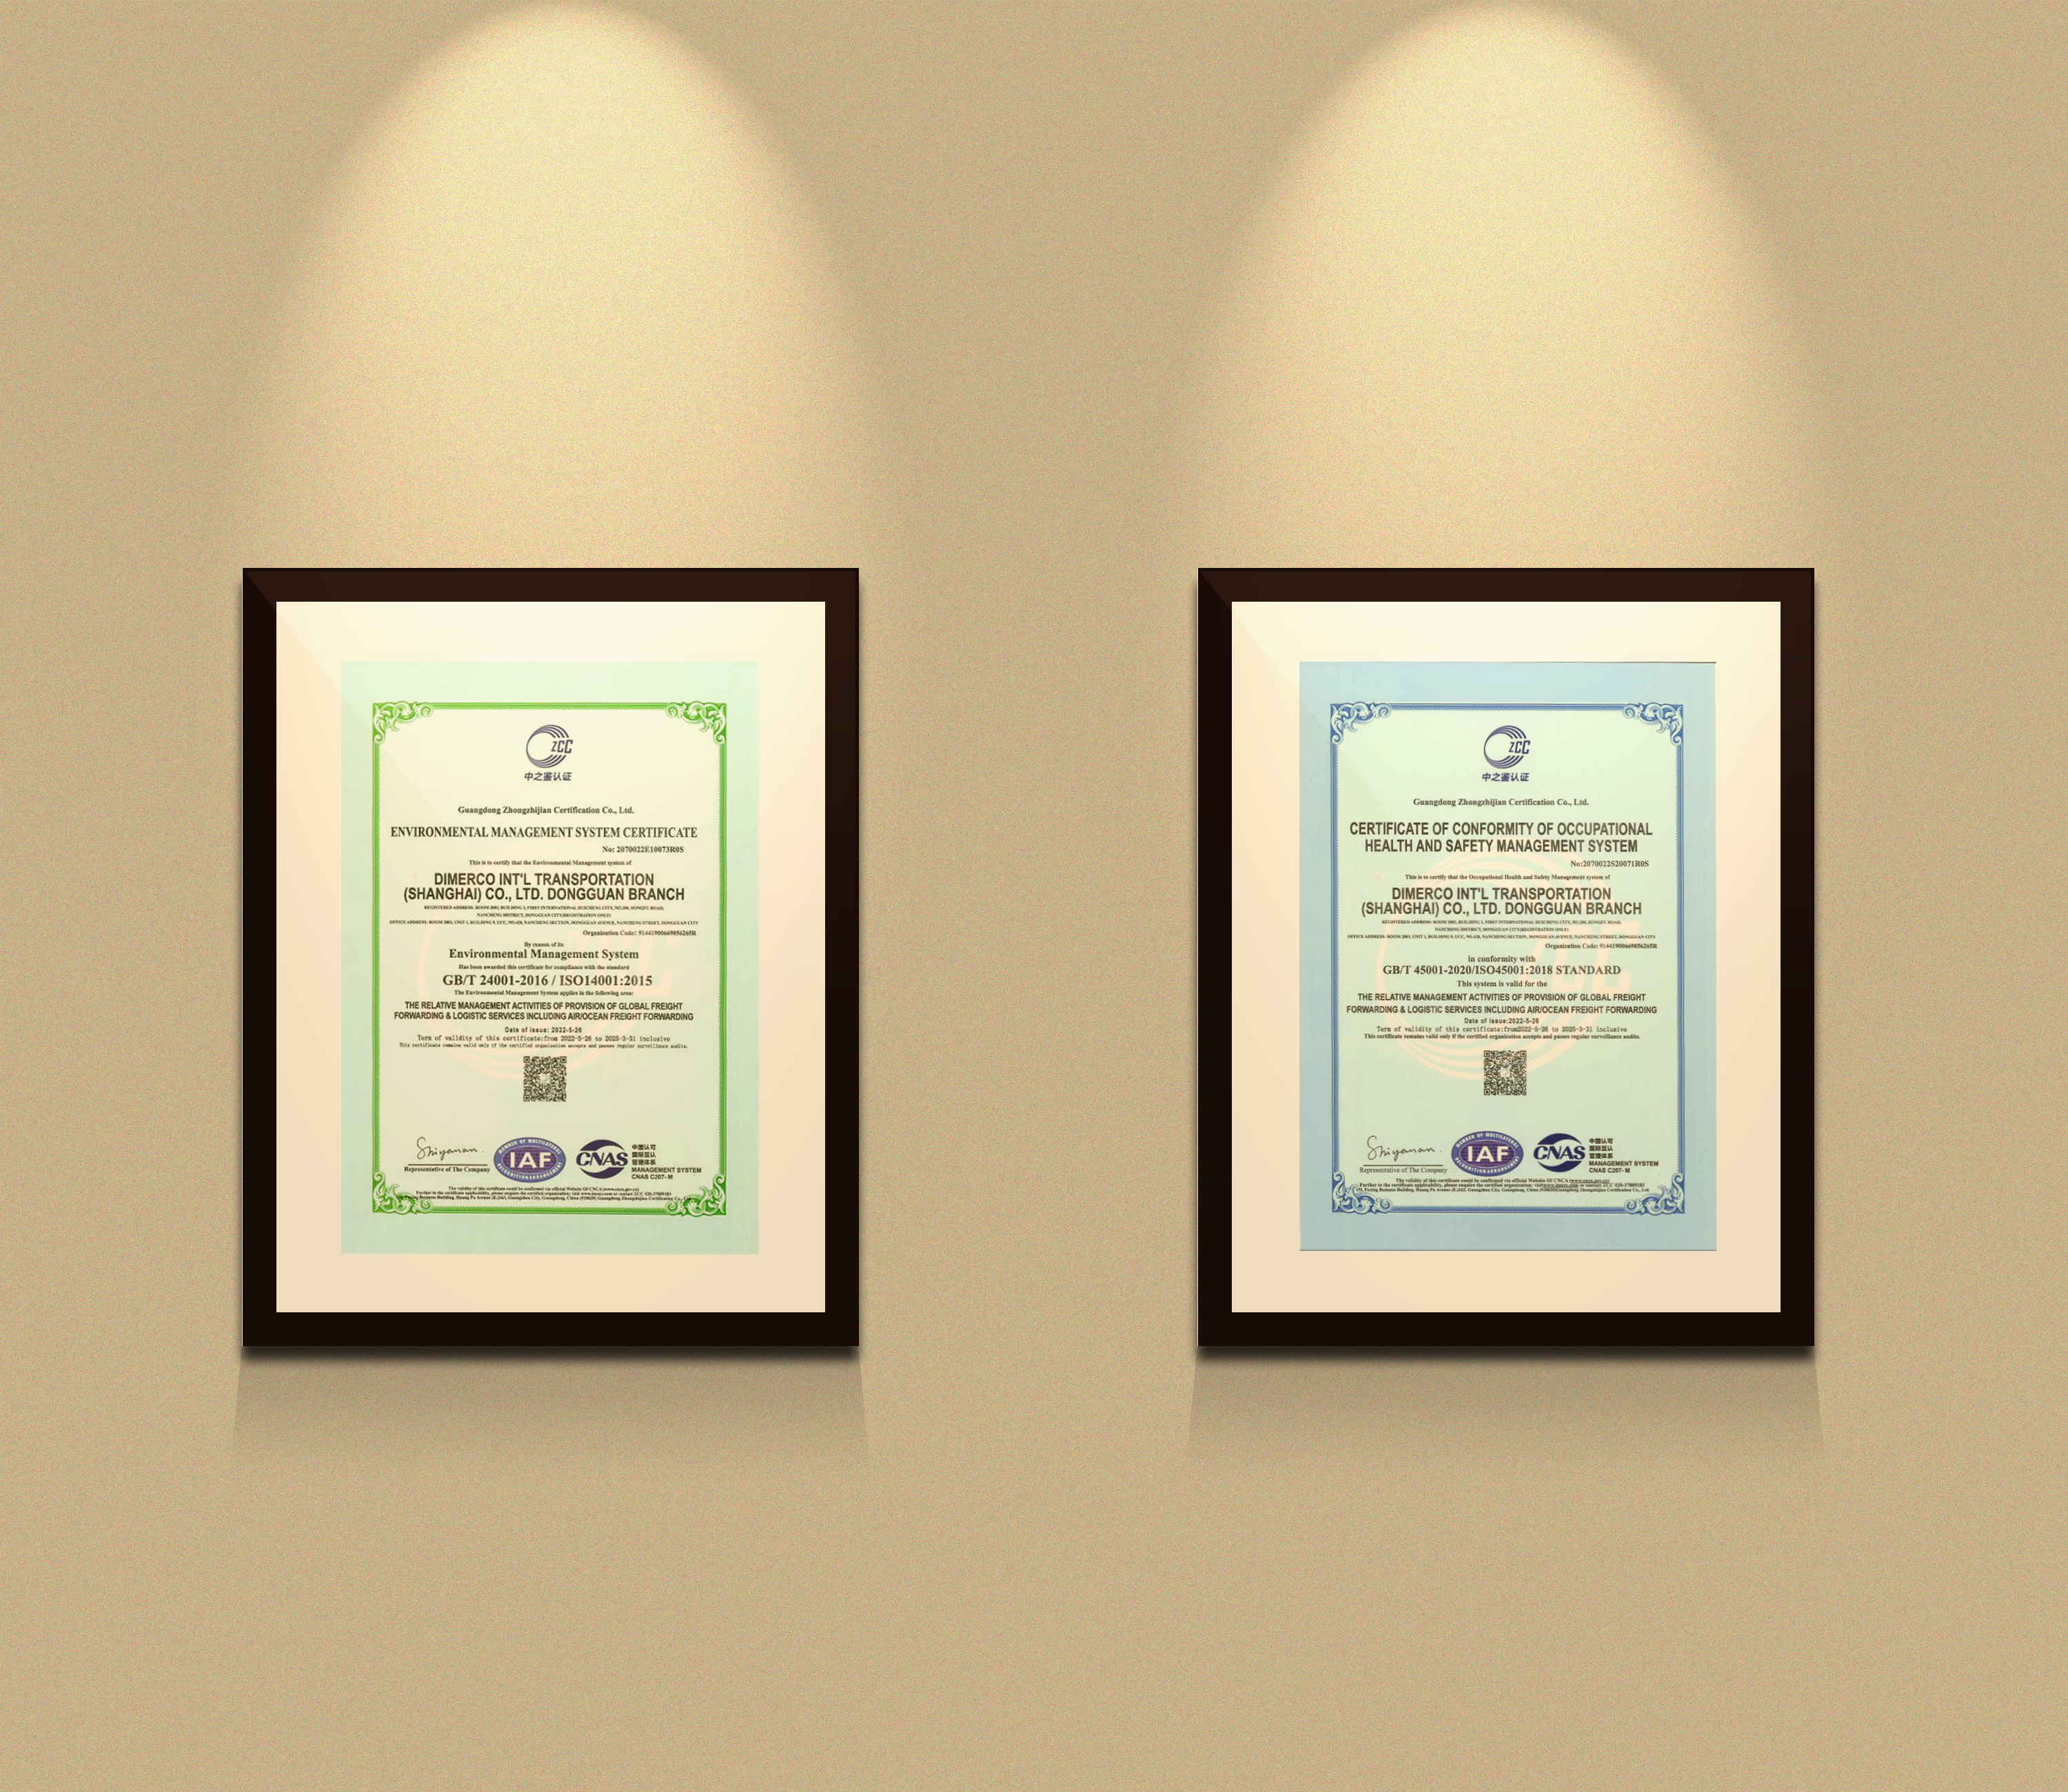 Dimerco recognized both ISO 14001 & ISO 45001 in China in Q2 2022